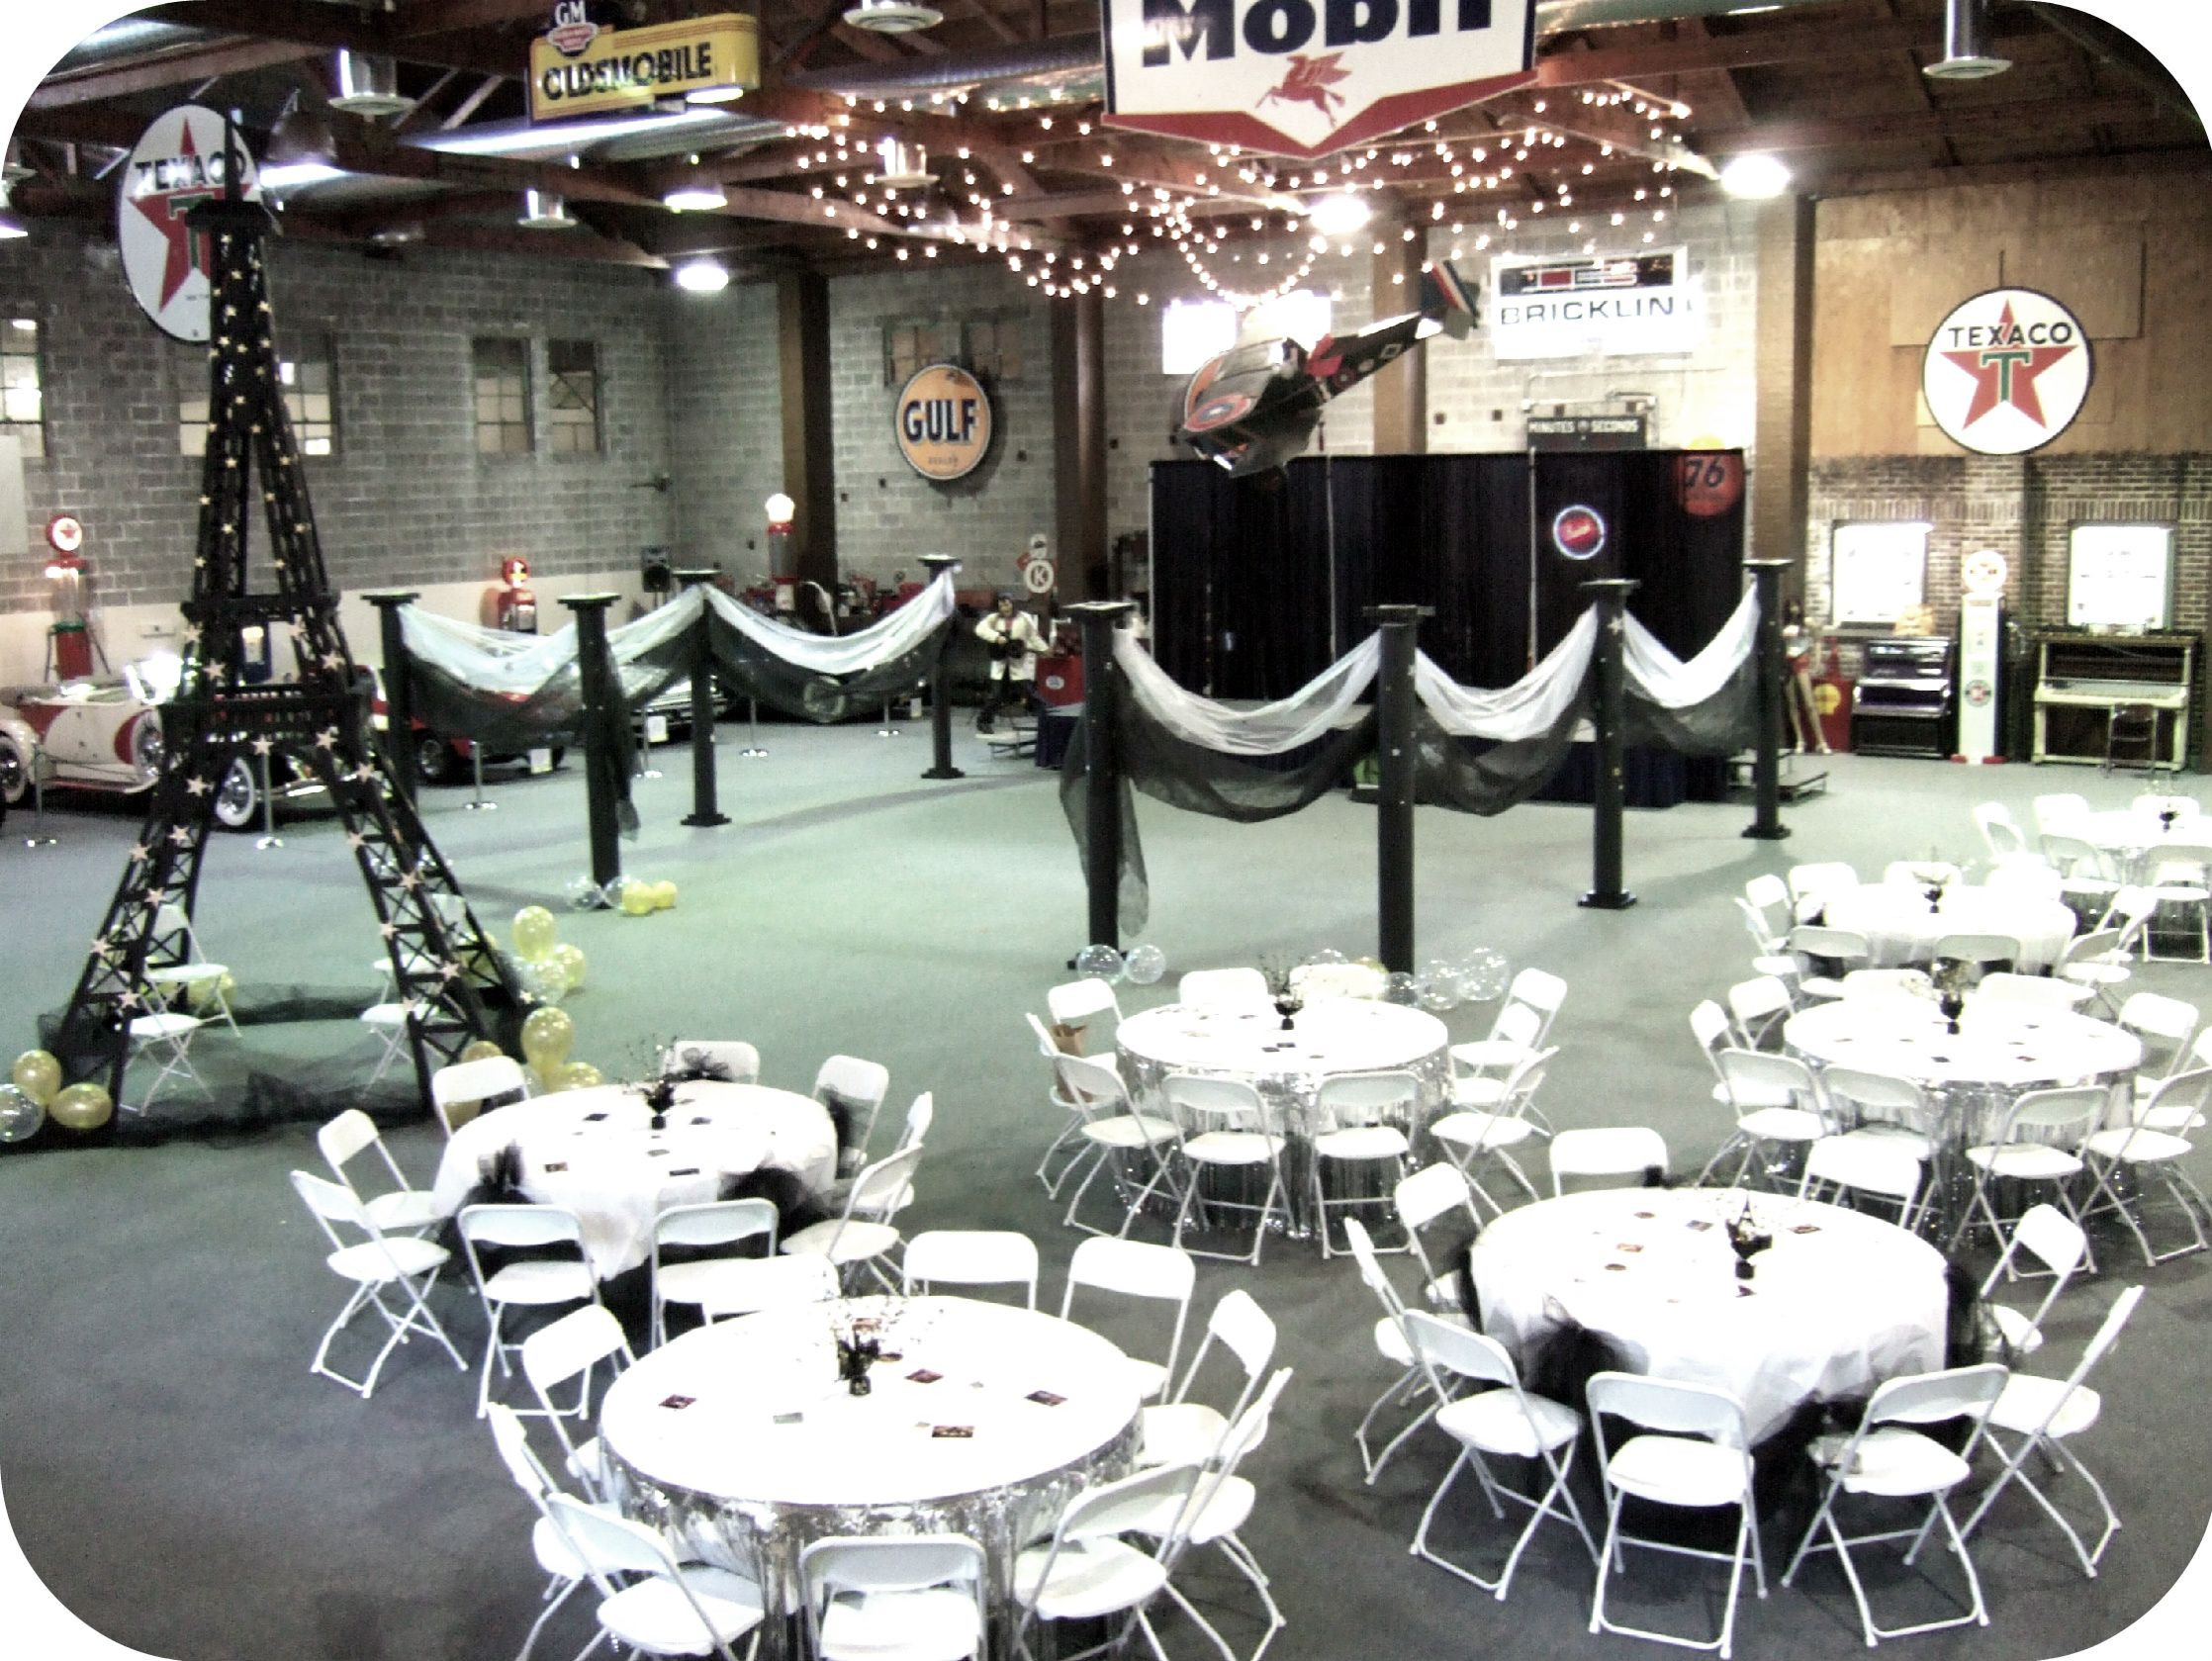 Paris Themed Graduation Party Ideas
 The gymnasium at the LeMay Family Collection decorated for